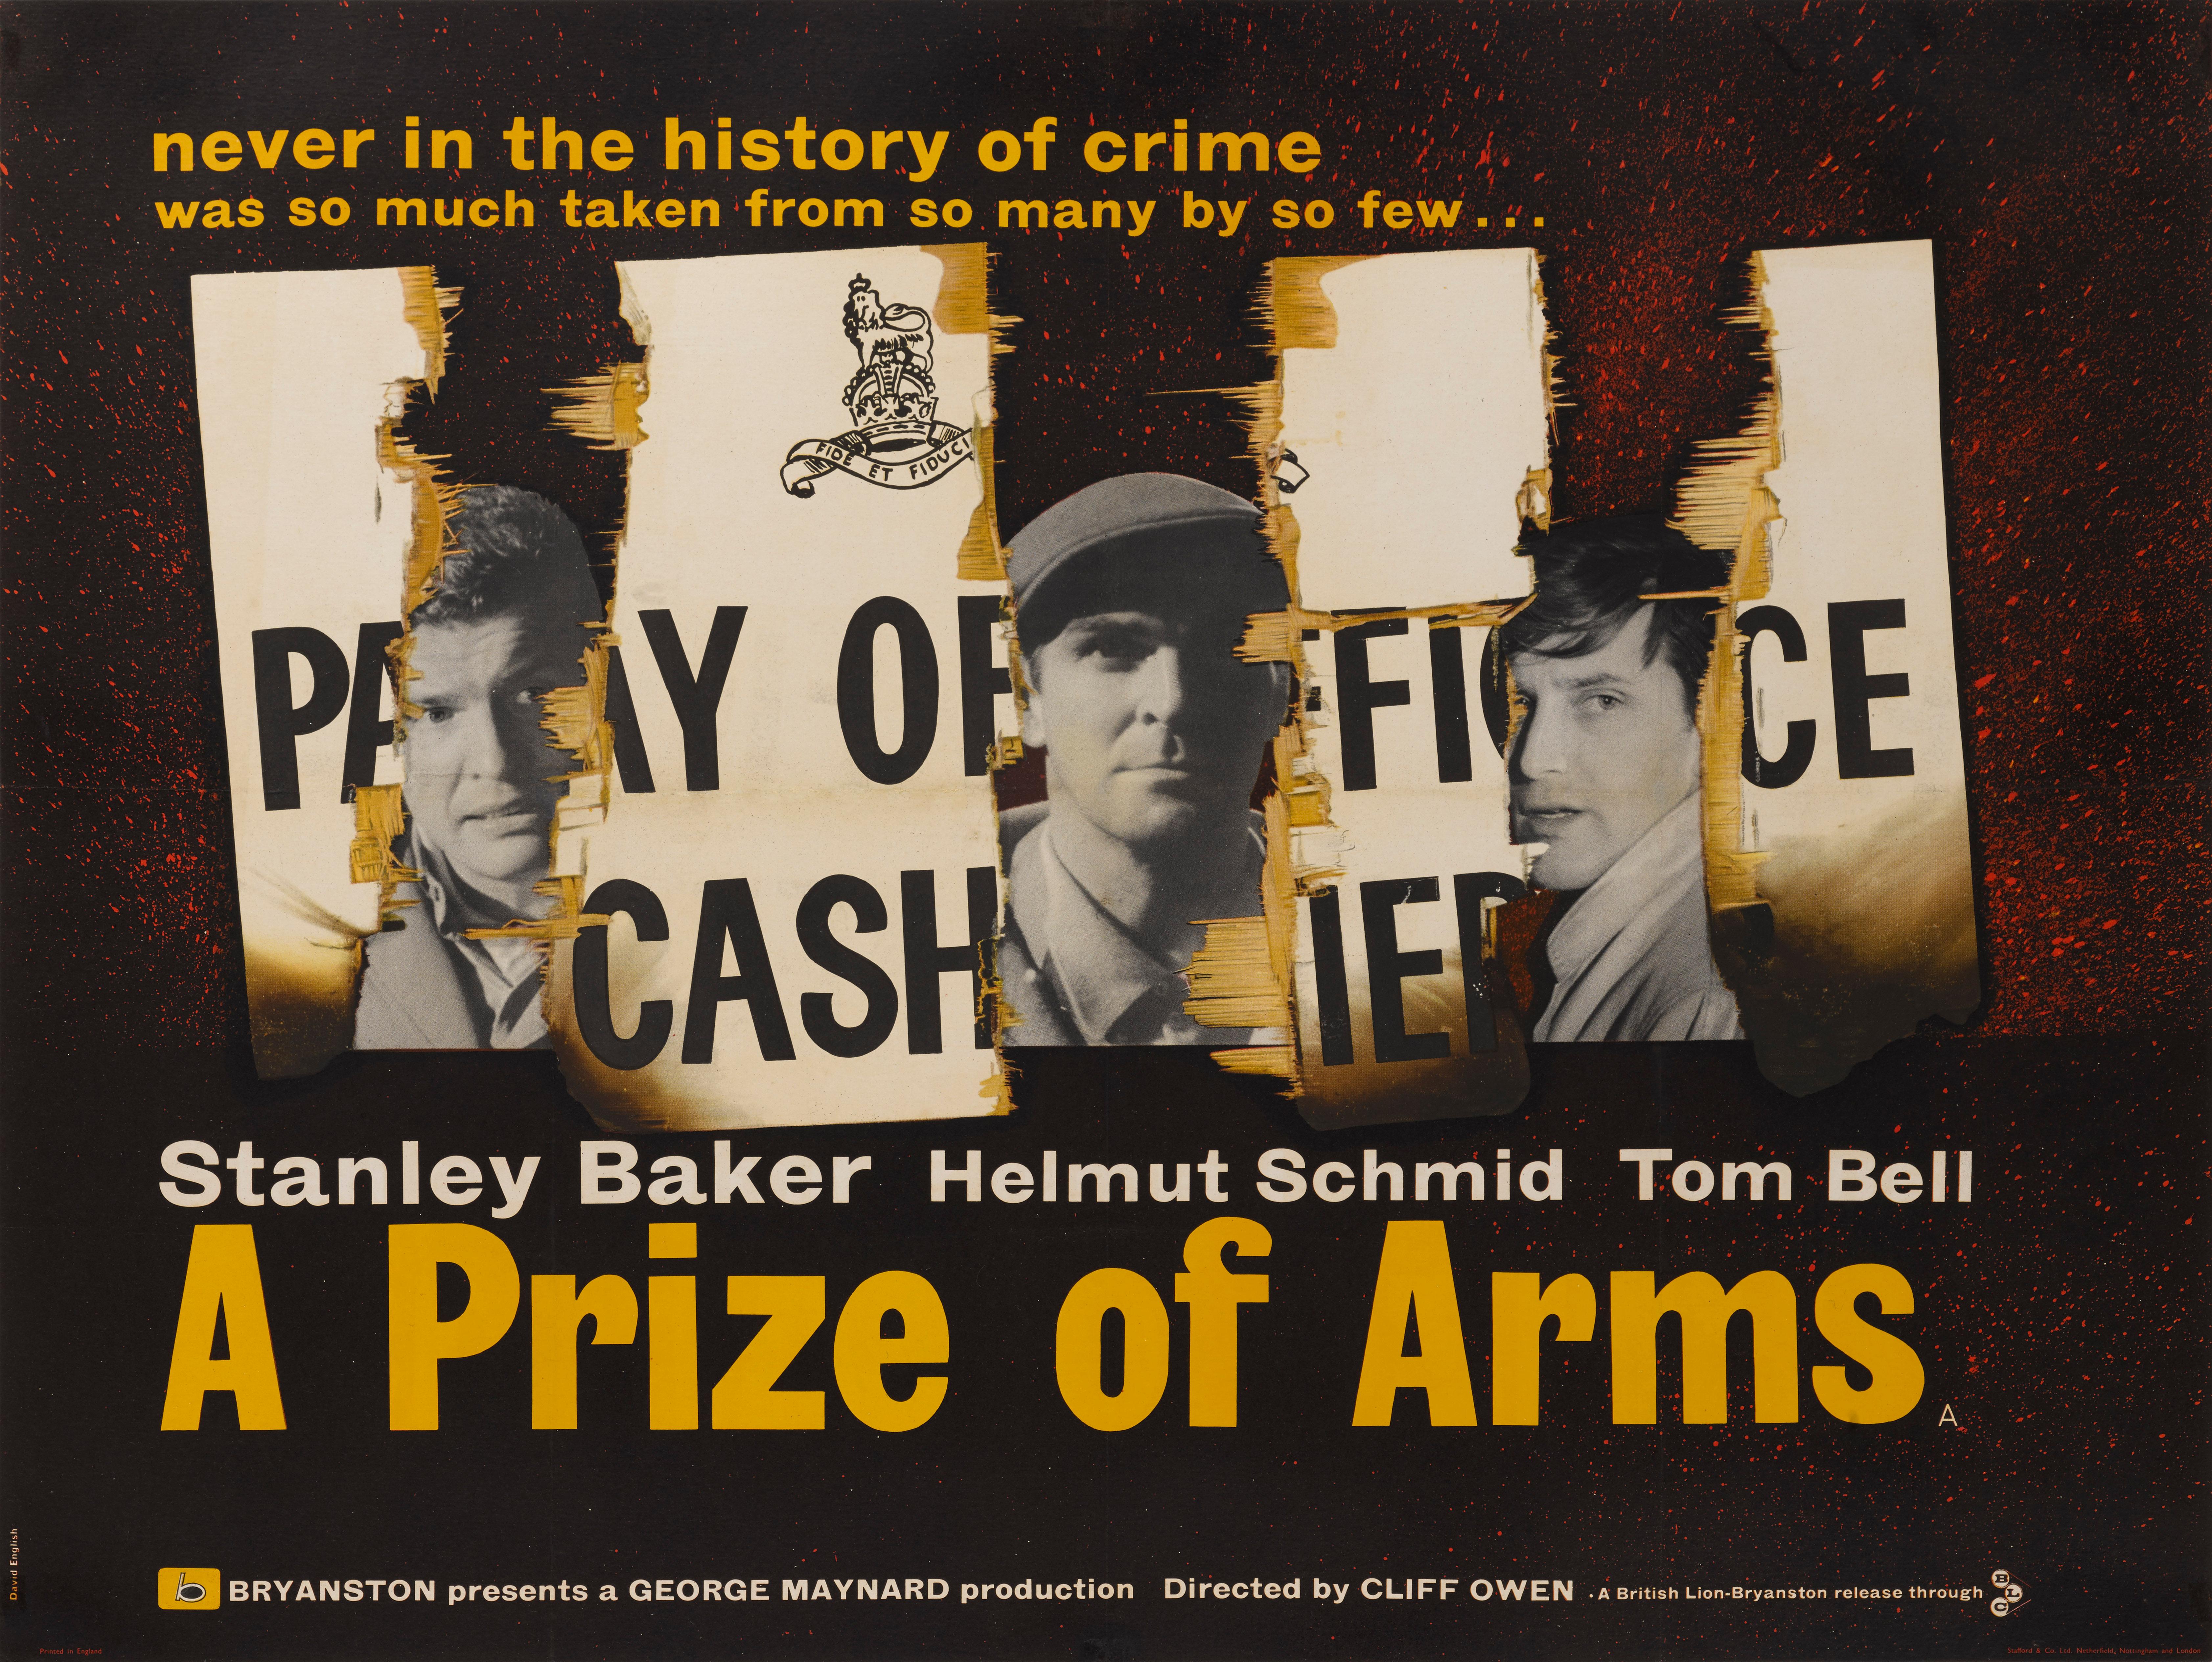 British Prize of Arms Film Poster For Sale